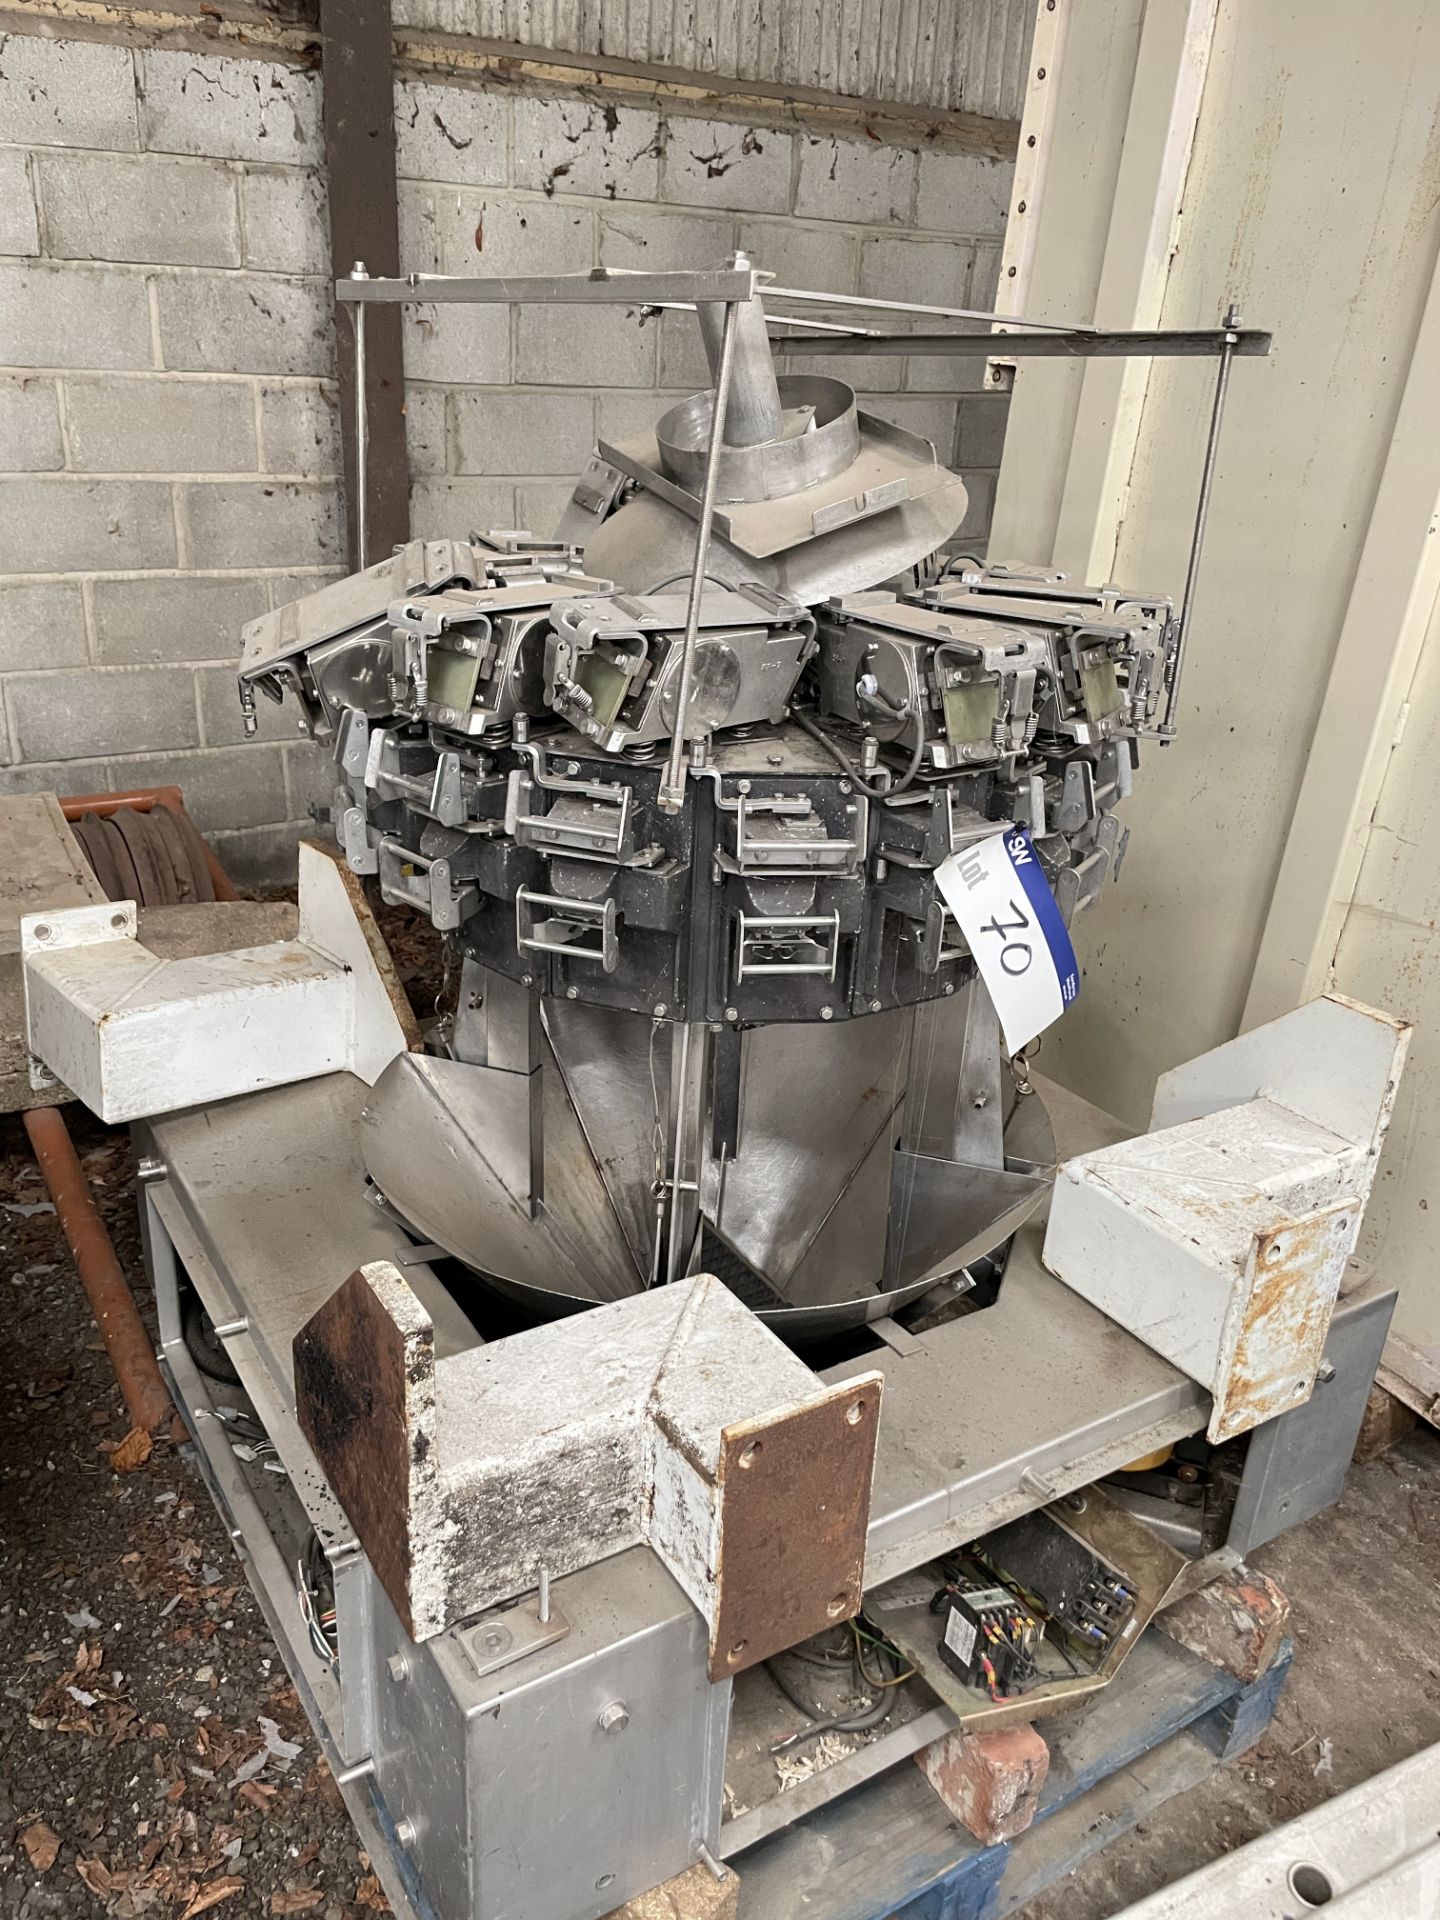 Stainless Steel 14 Head Weigher, understood to be